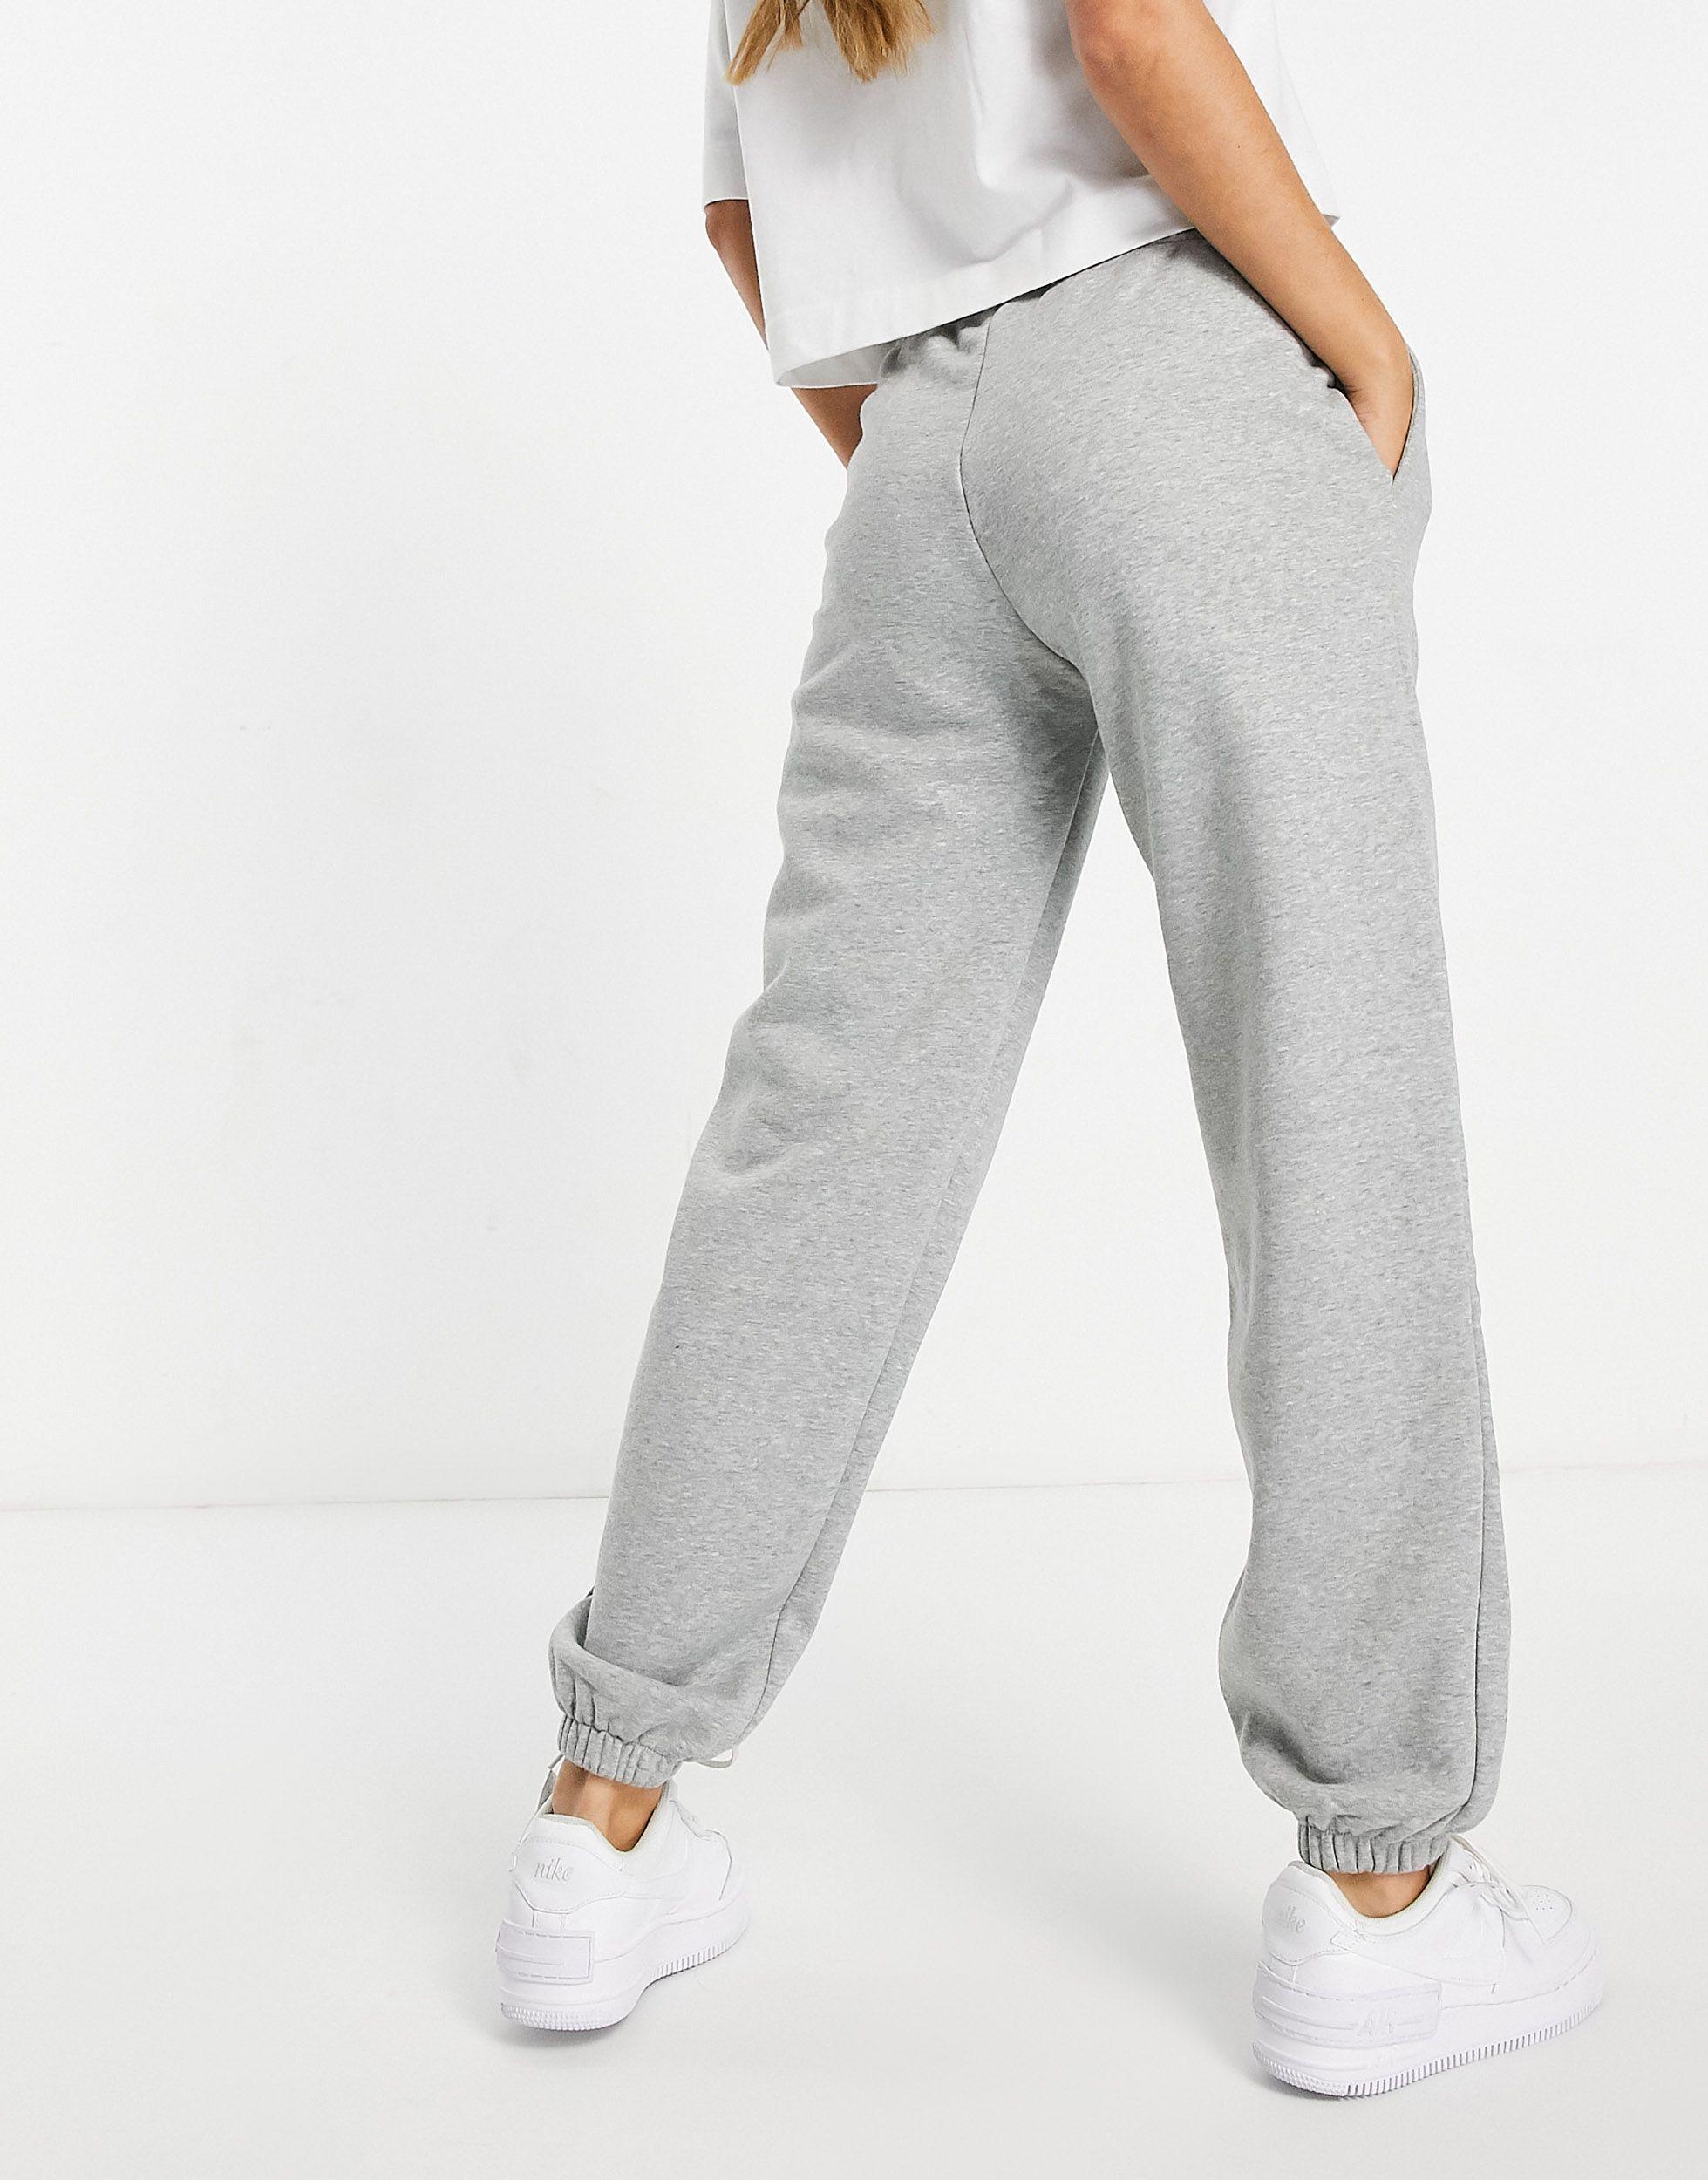 Nike Essentials Loose Fit Sweatpant in Grey (Gray) - Lyst